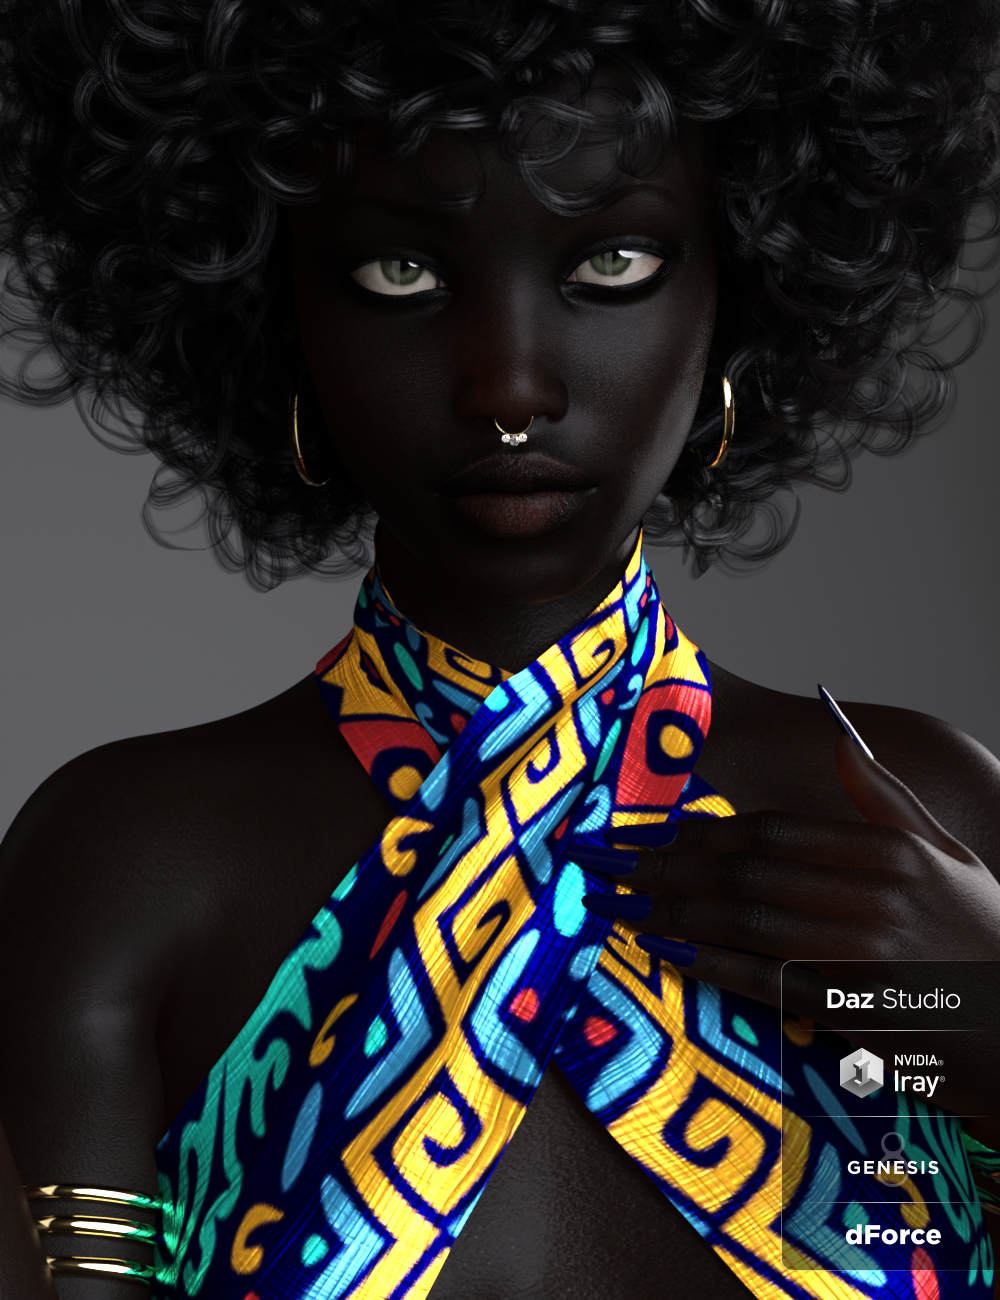 BD Oshun And Her Outfit For Genesis 8 Female by: Belladona, 3D Models by Daz 3D